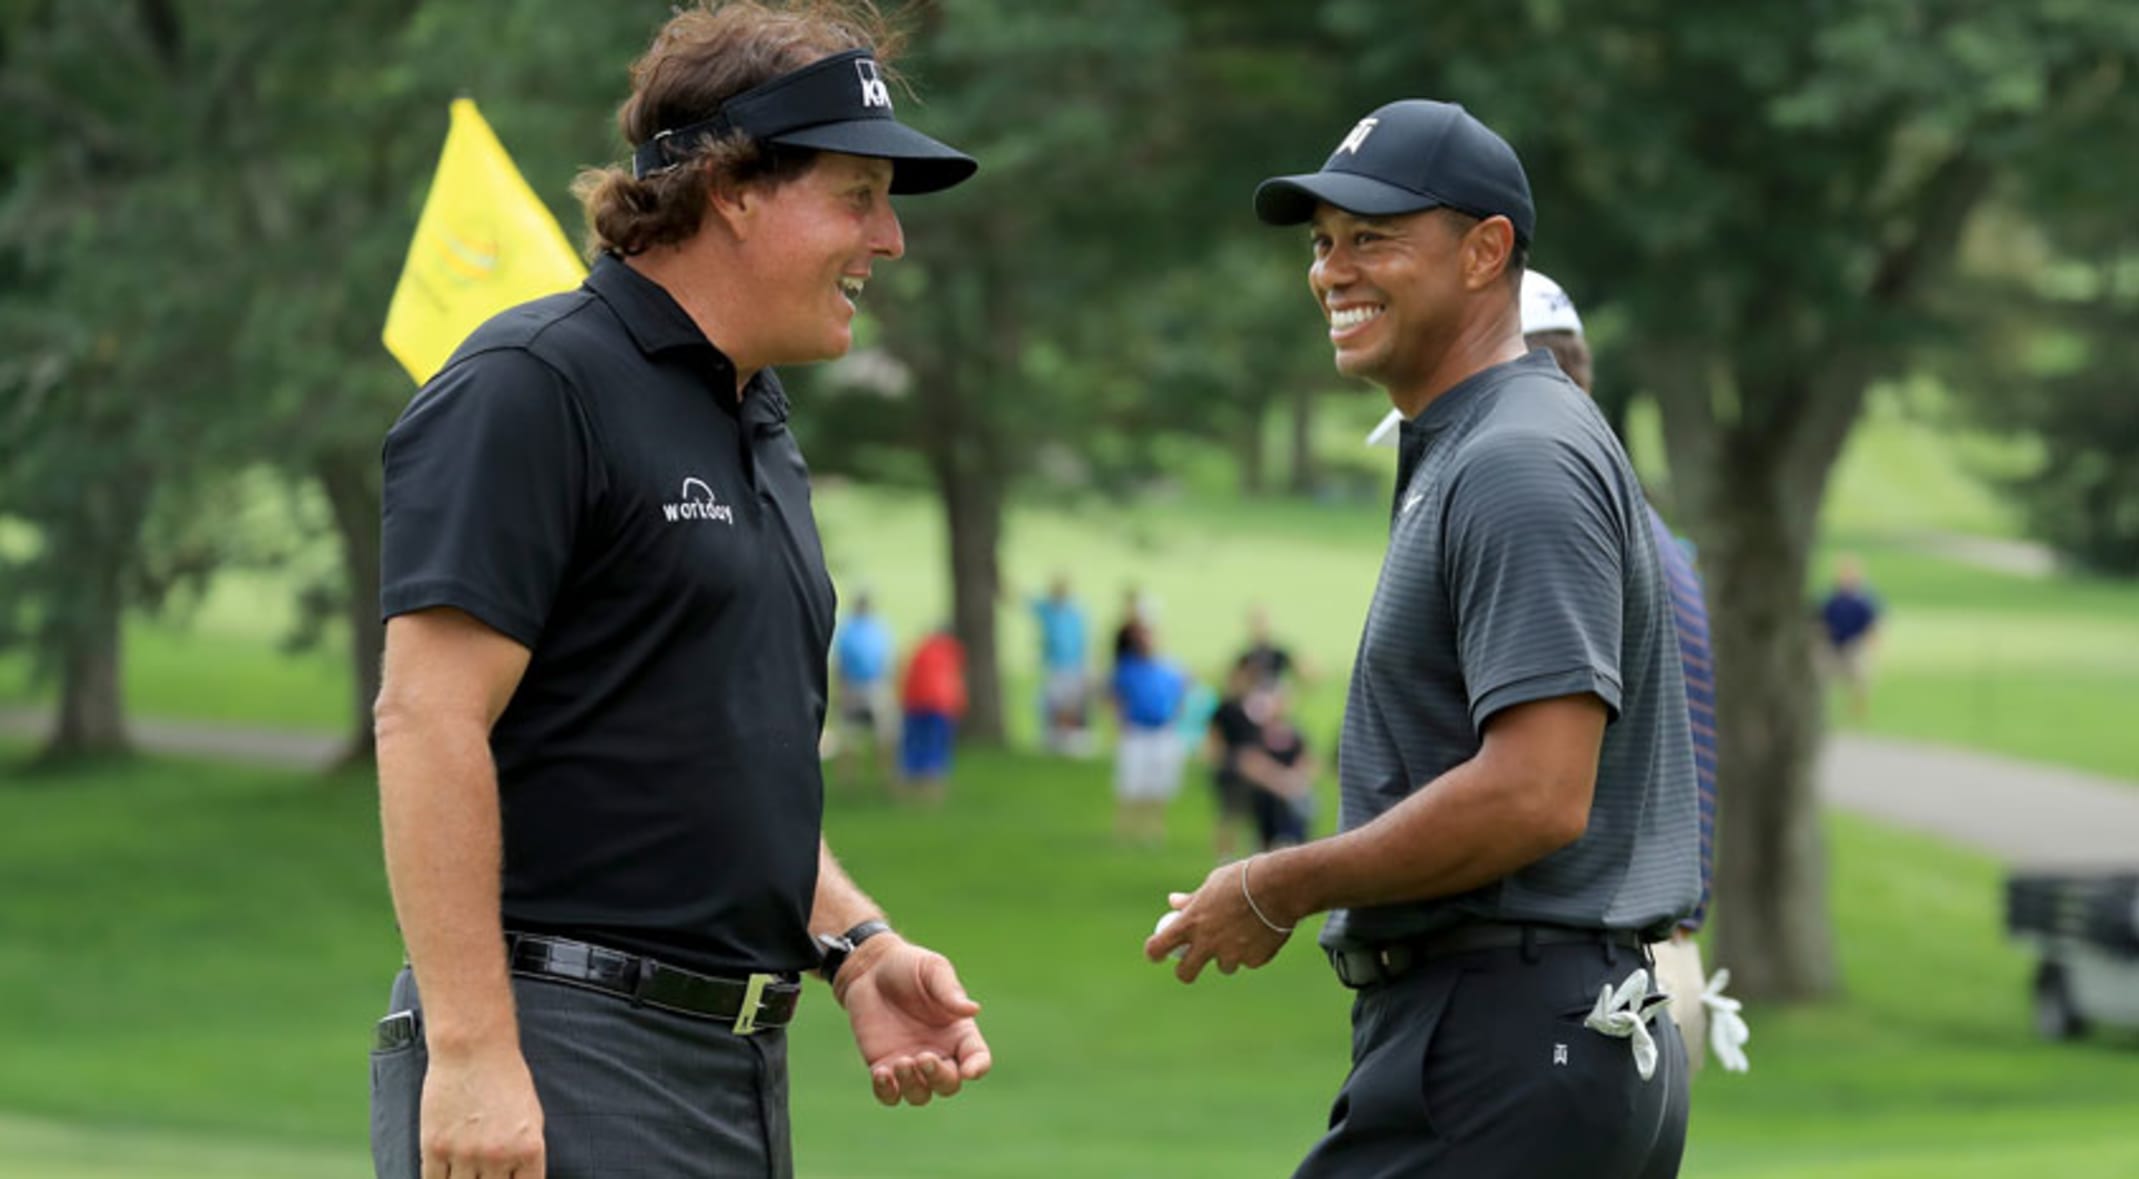 Tiger Woods Phil Mickelson Head To Head Match To Take Place November 23